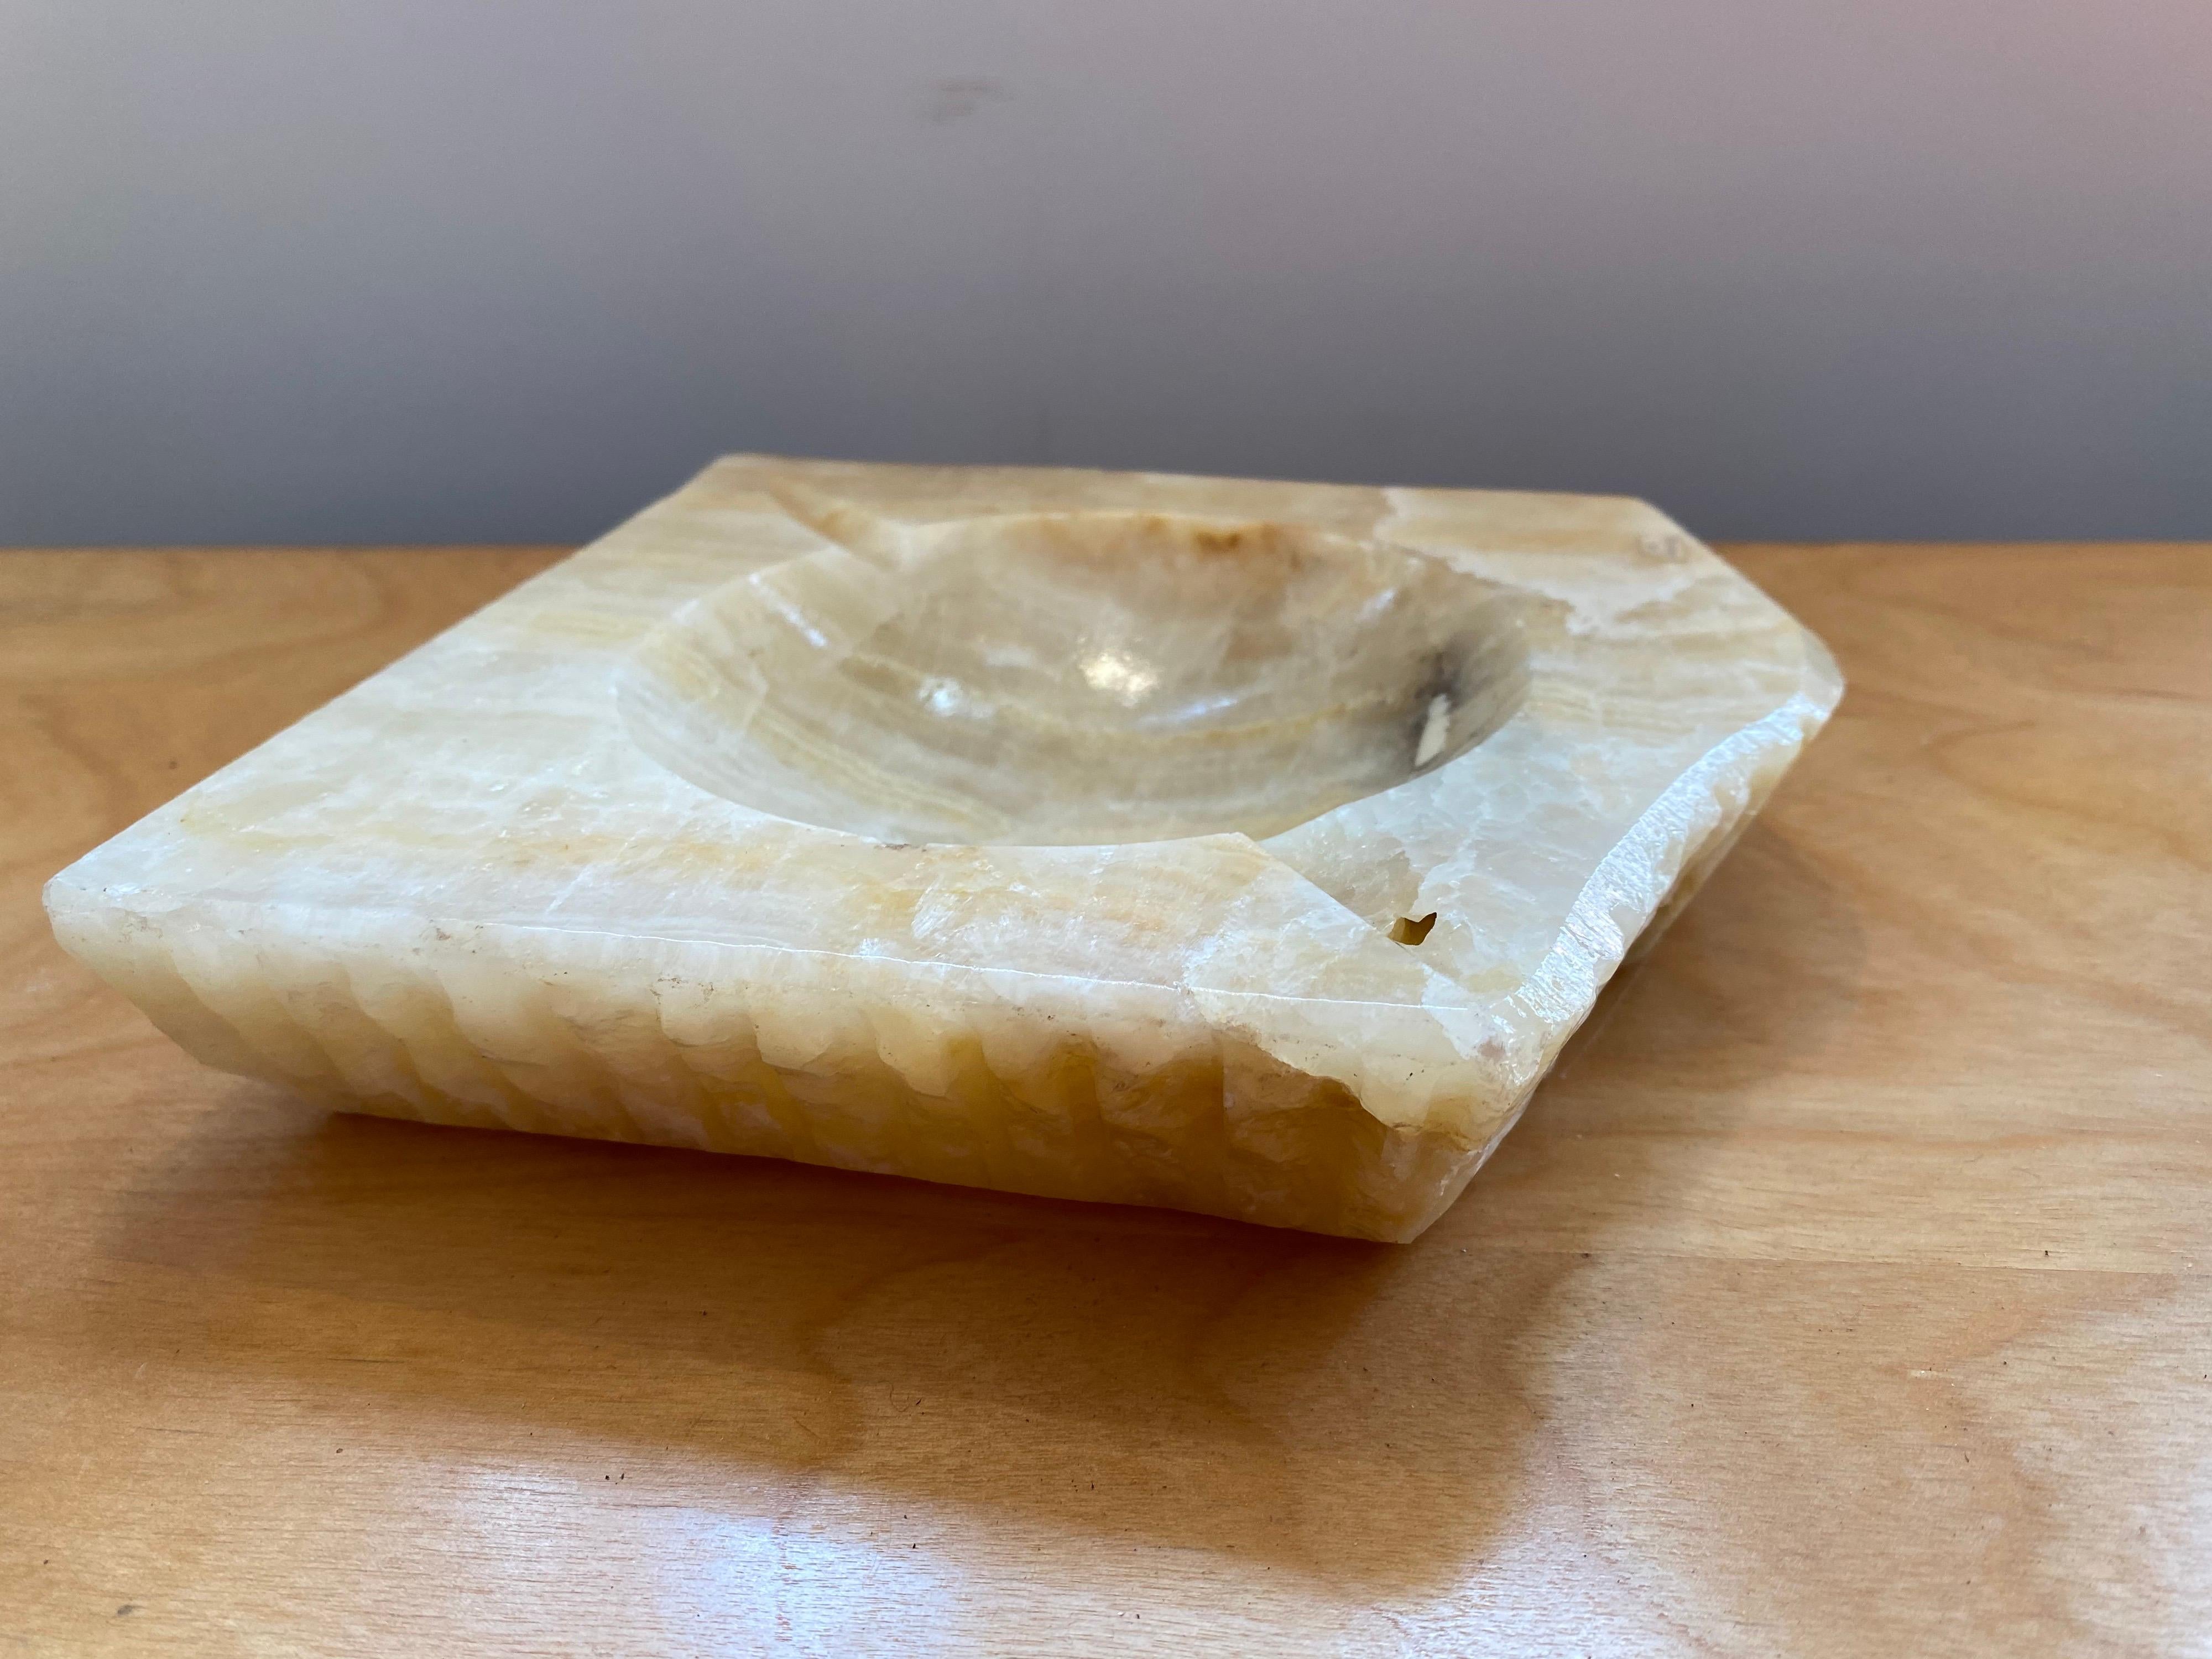 Roughly square shaped rough edged marble ashtray.